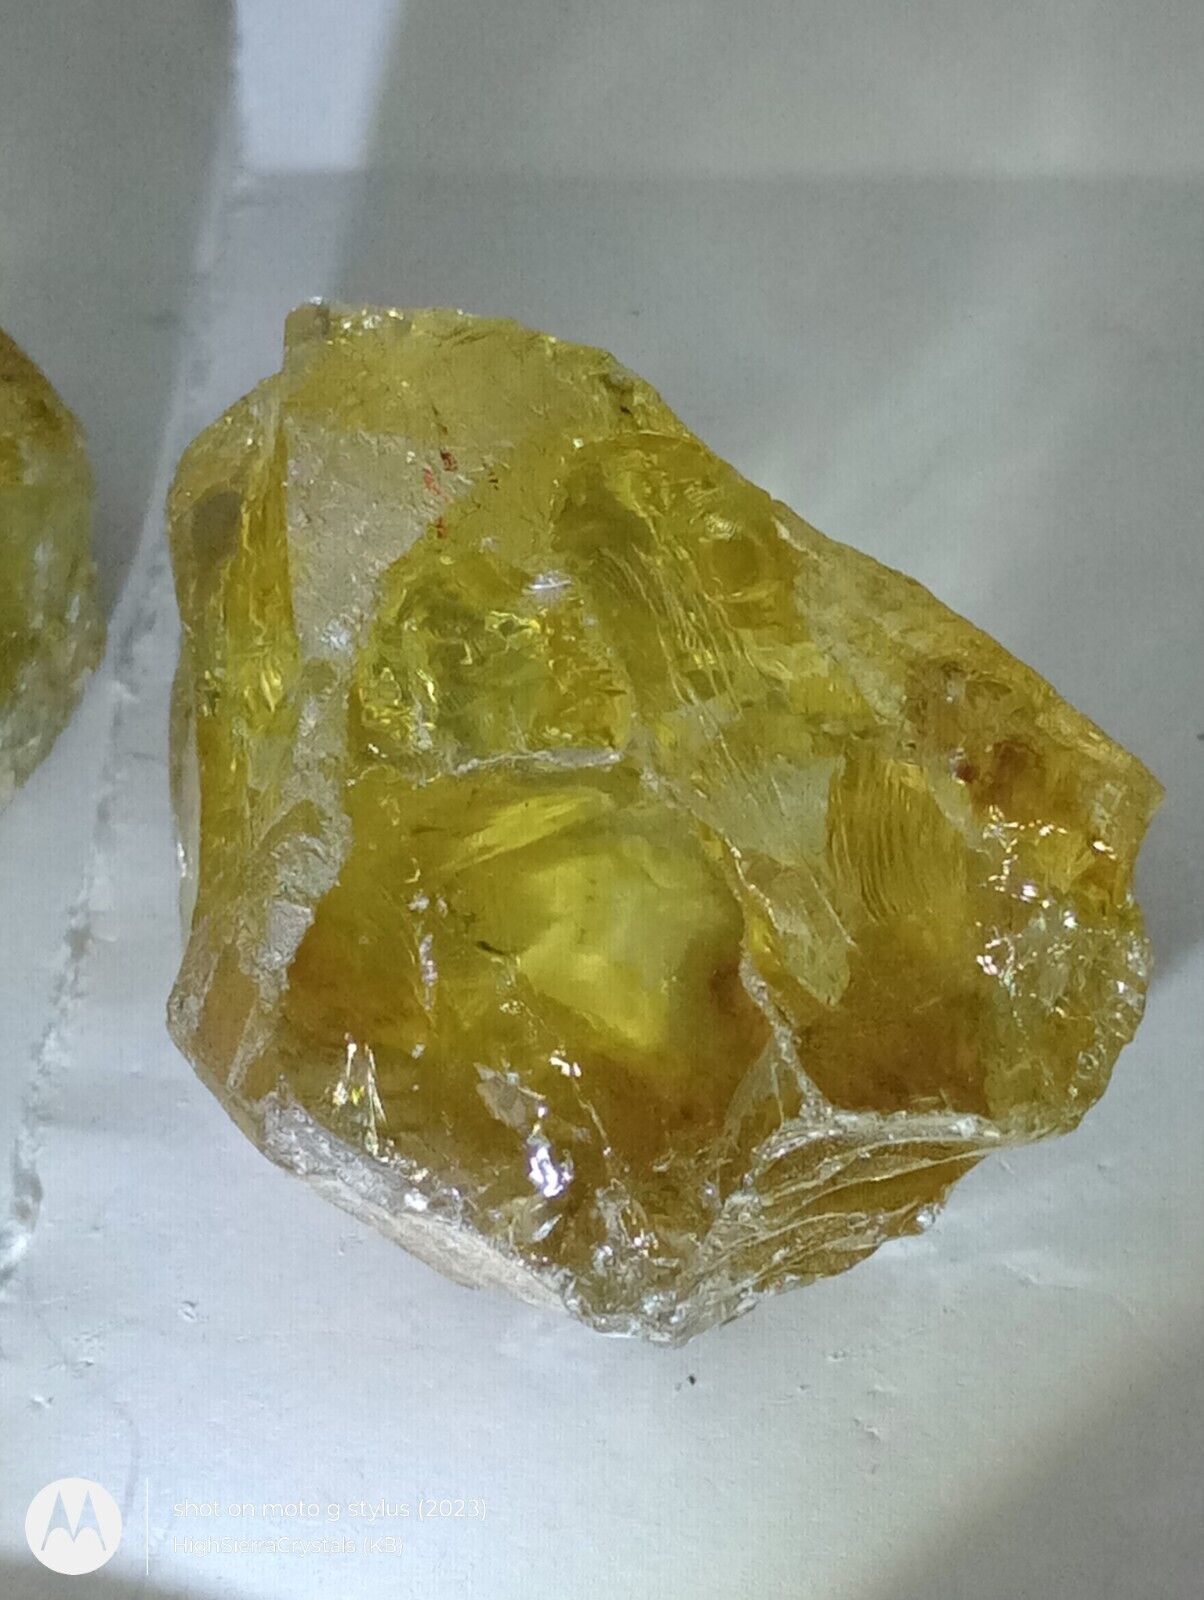 🔥 GENUINE CITRINE RAW RARE BRAZIL 2PC LOT FACET MATERIAL LAPIDARY CABB8NG SAW